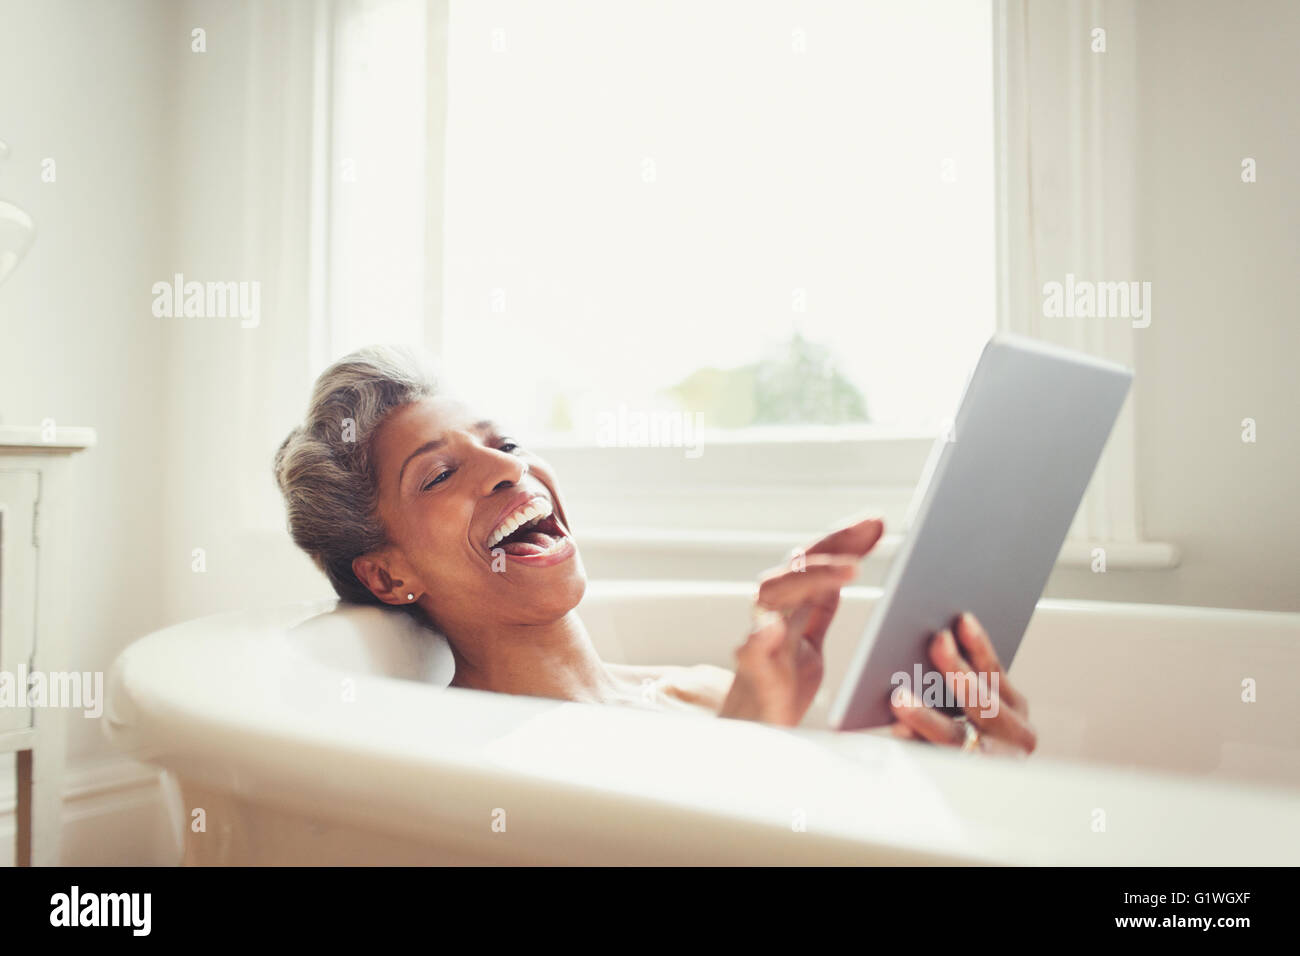 Laughing mature woman using digital tablet in bathtub Stock Photo